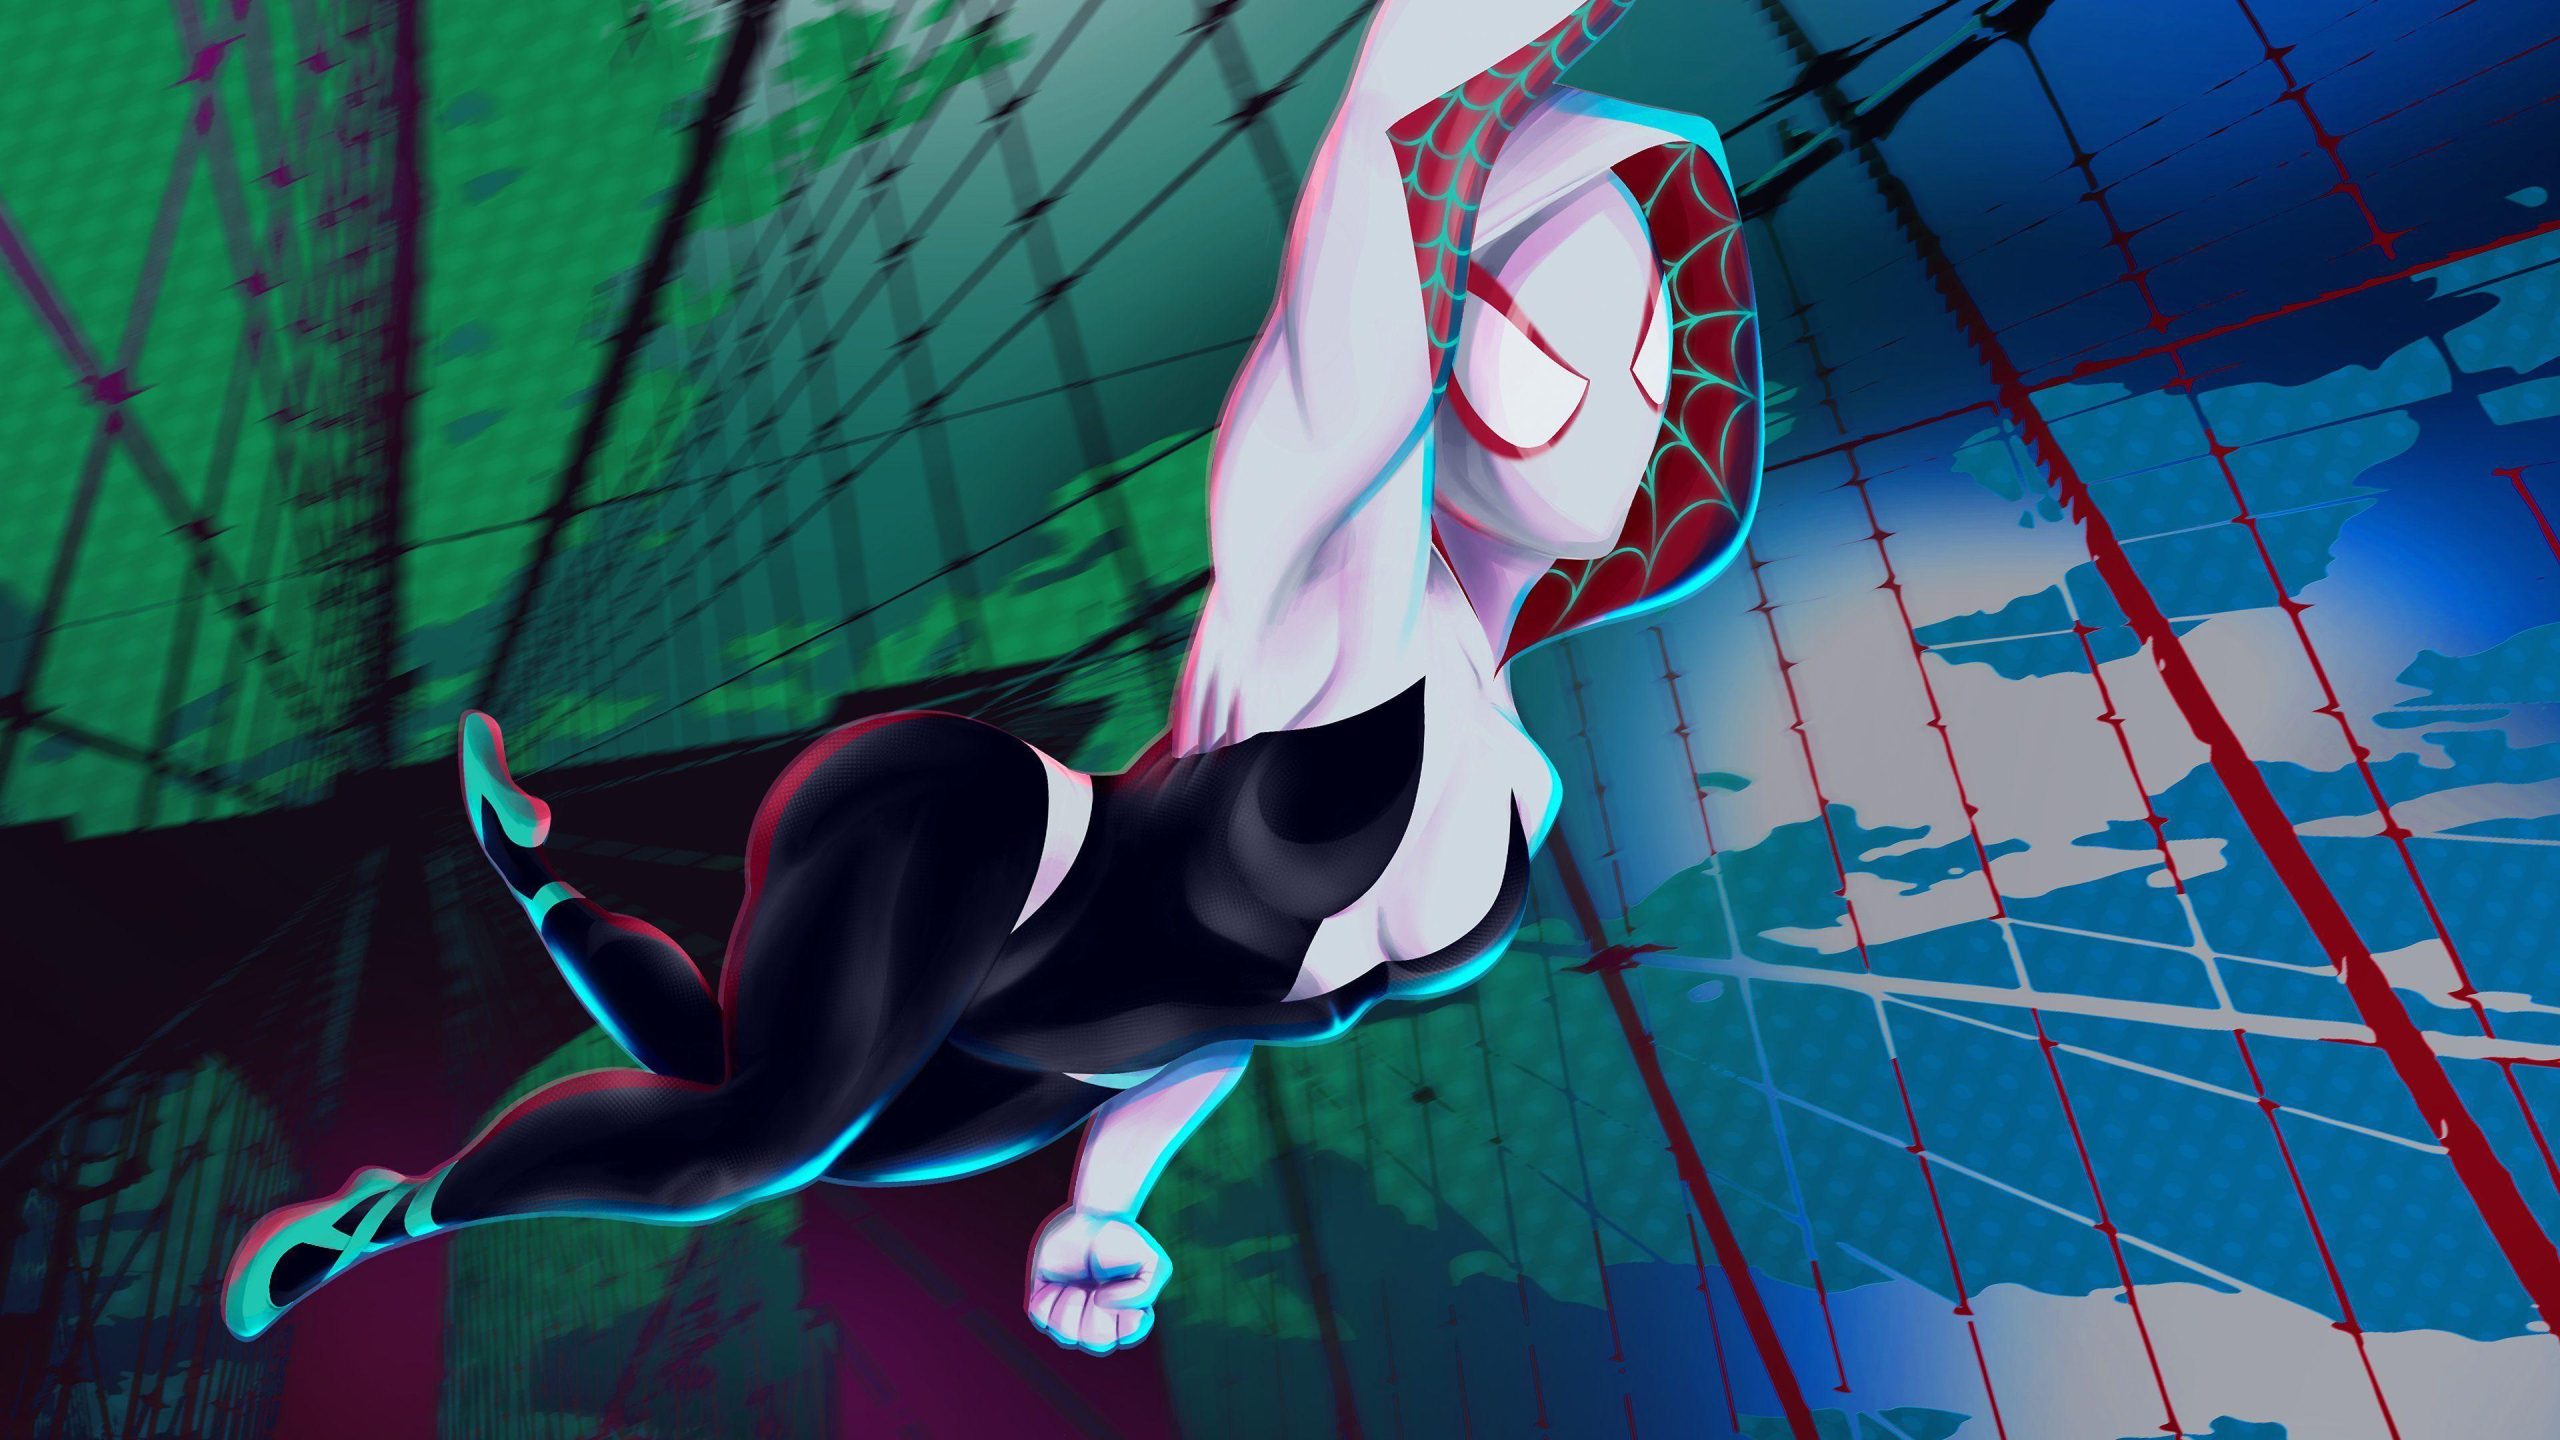 Miles Morales And Gwen Stacy 4k Desktop Hd Wallpapers For Pc, Miles Morales And Gwen Stacy 4k Desktop, Movies